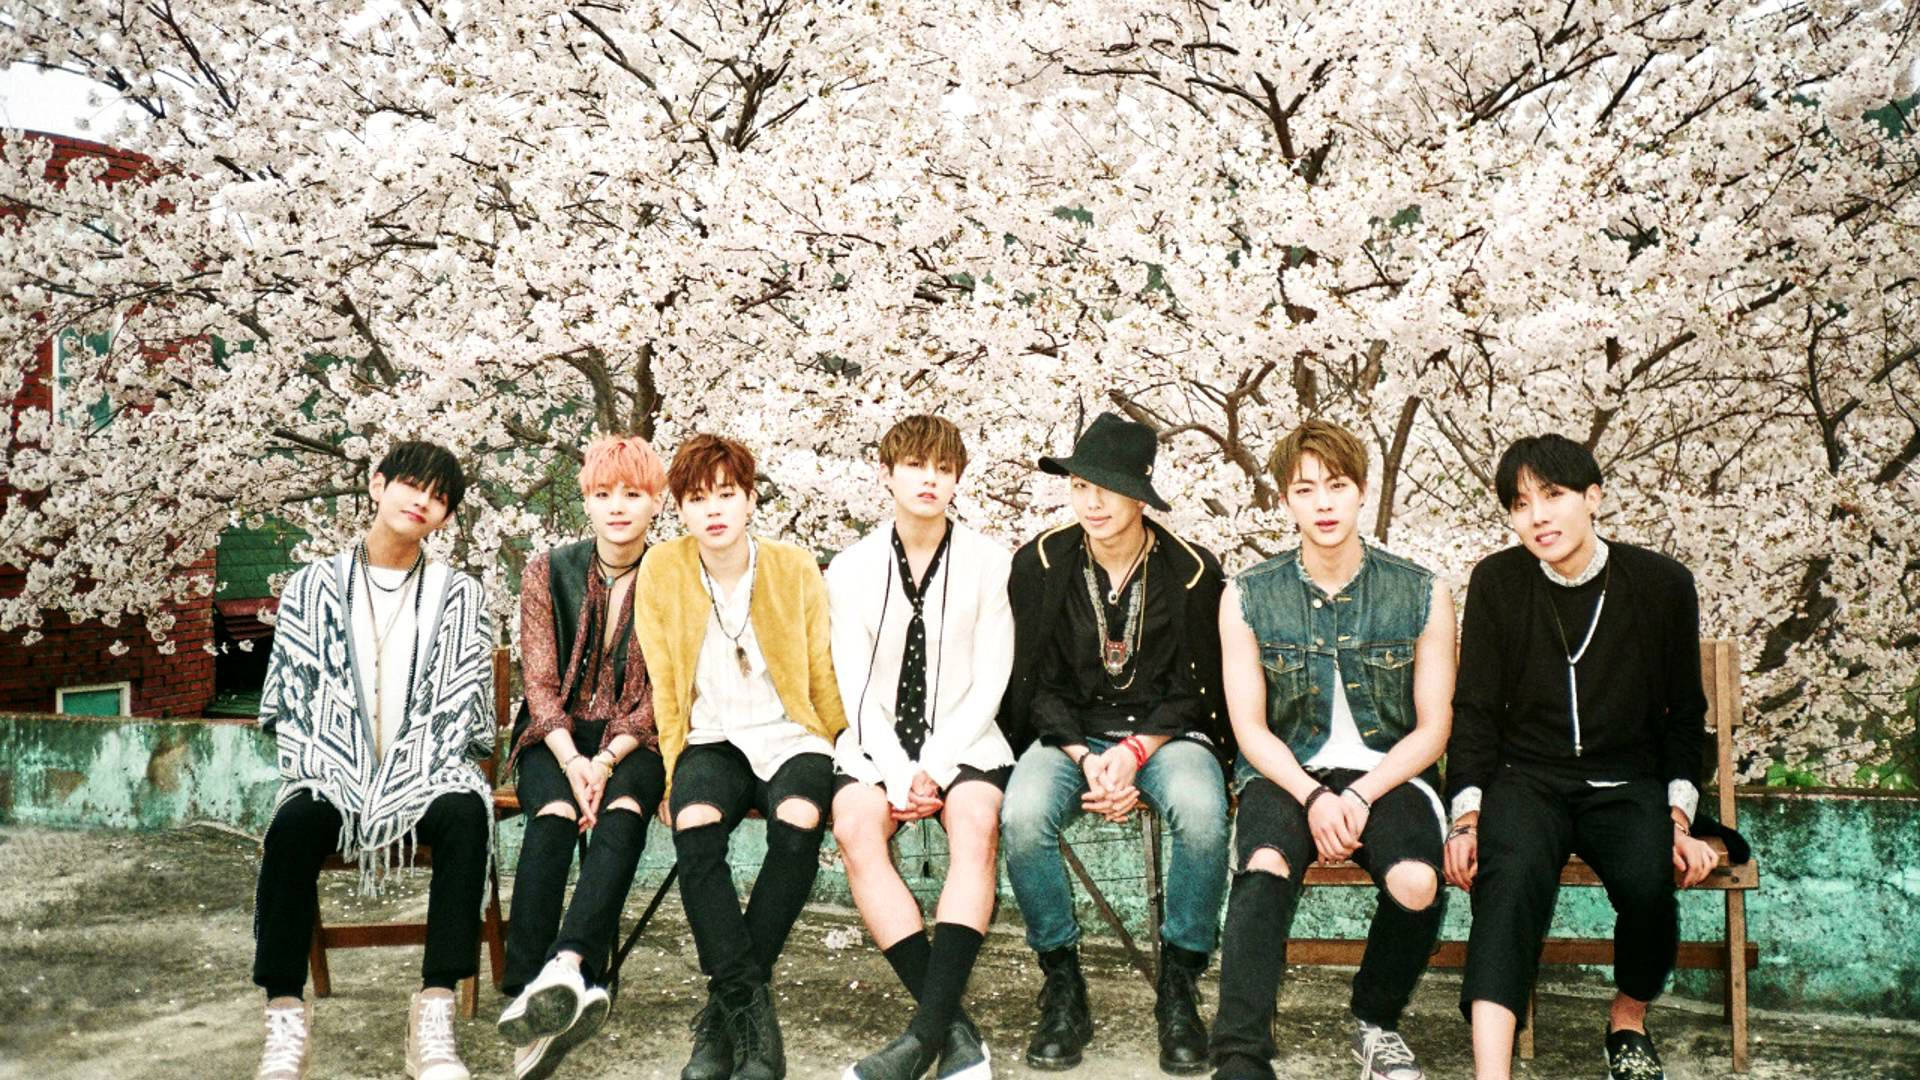 Bts With Cherry Blossoms